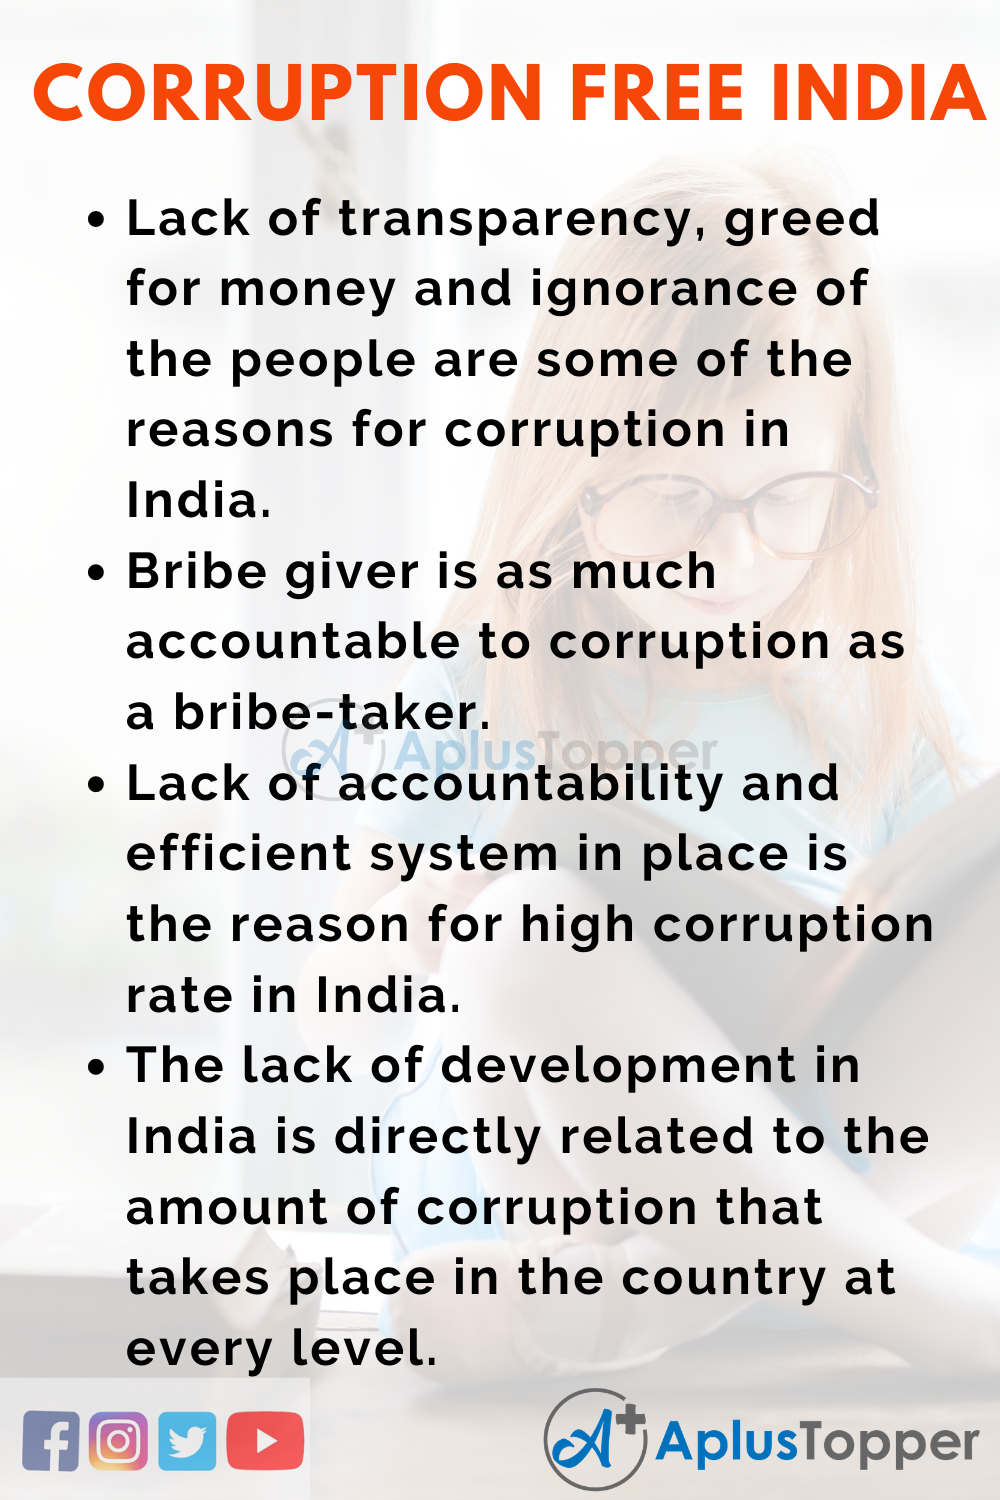 essay on corruption free india for a developed nation pdf